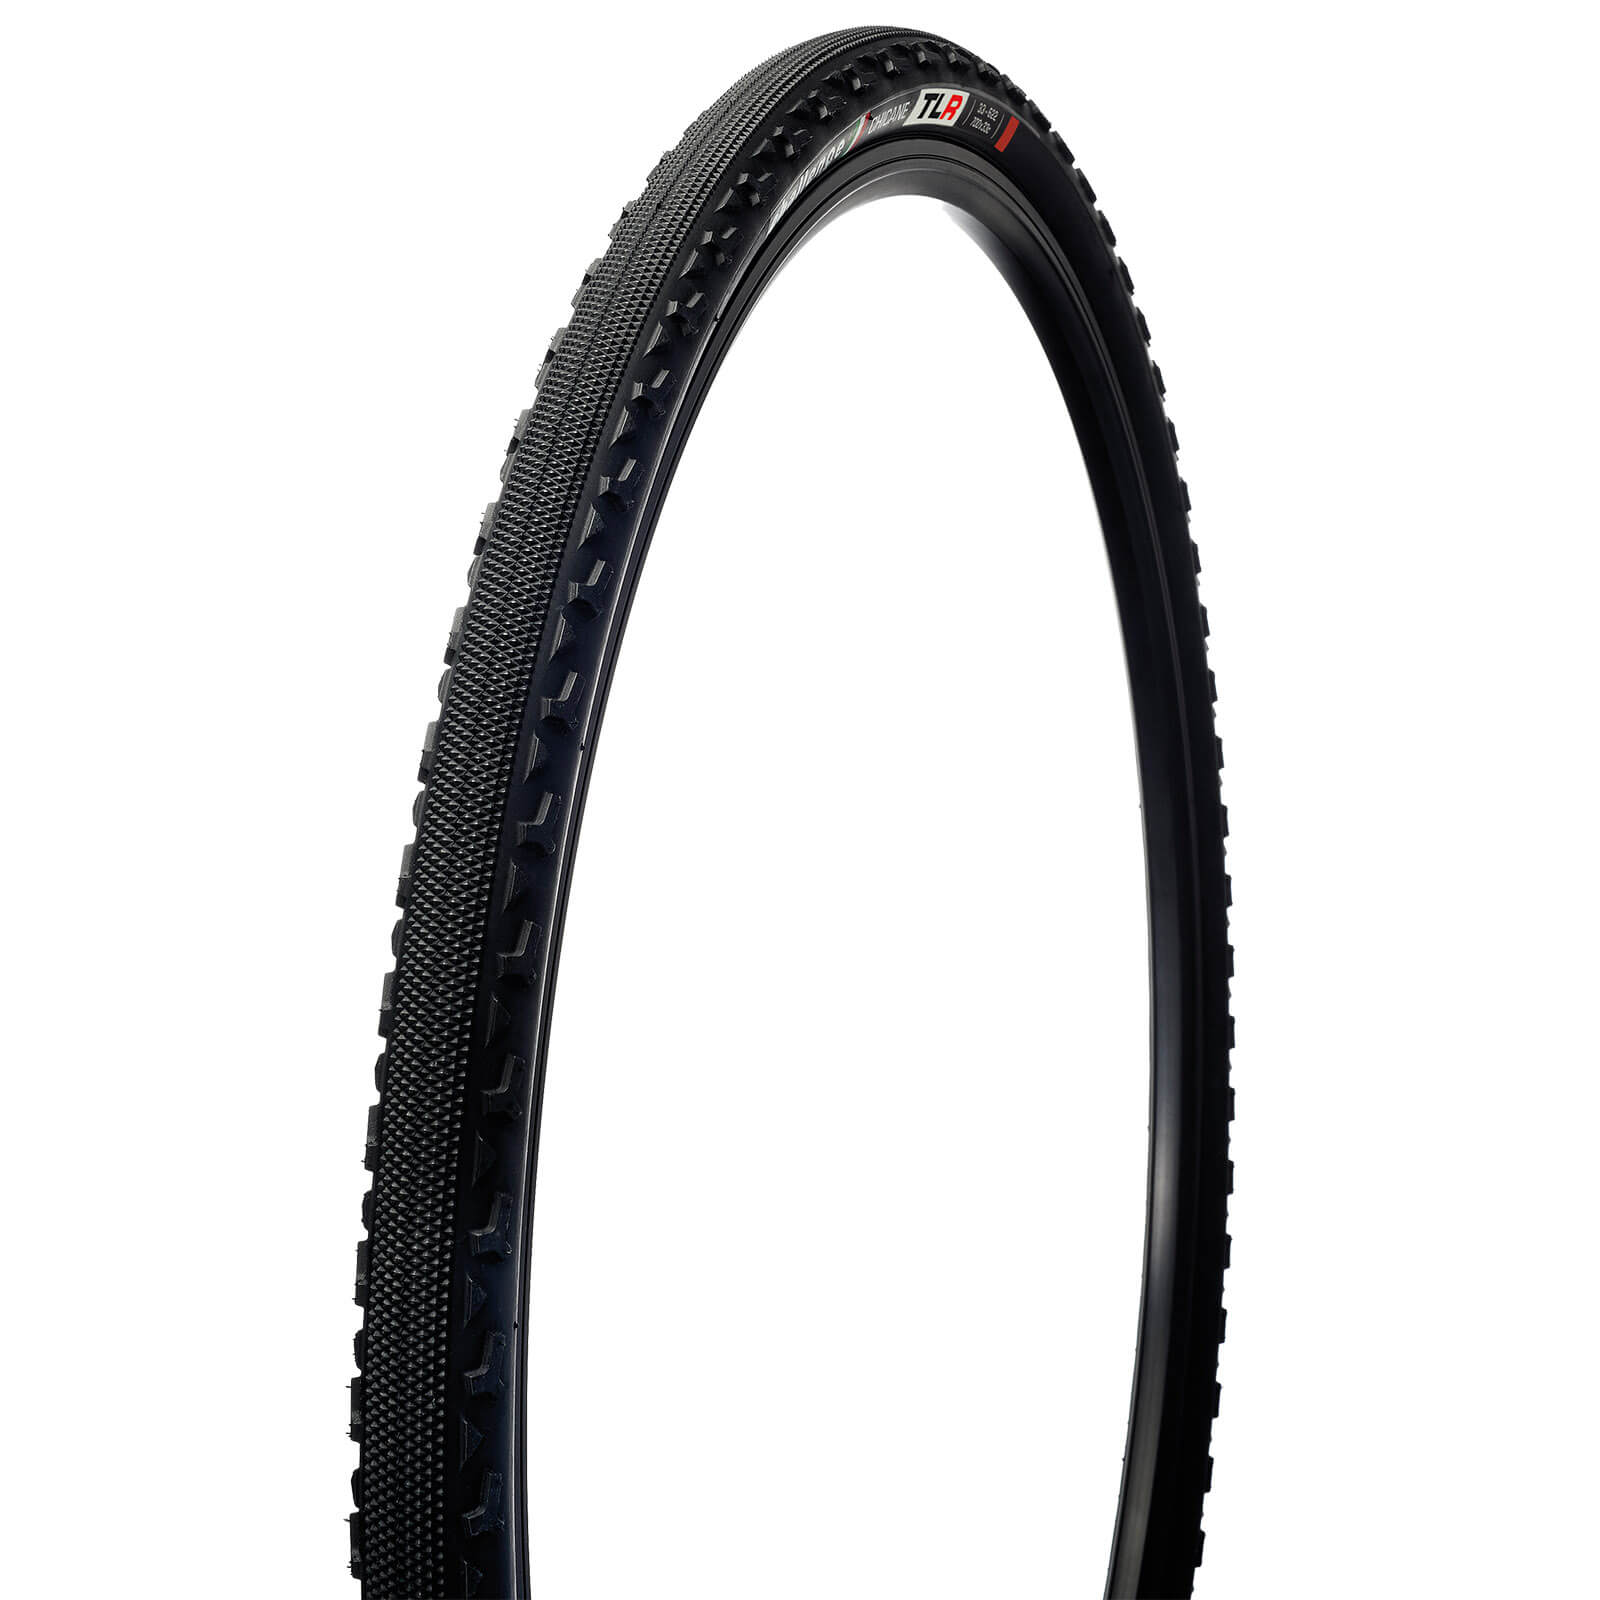 Challenge Chicane Tubeless Ready Clincher Tyre - Black - 700 x 33c